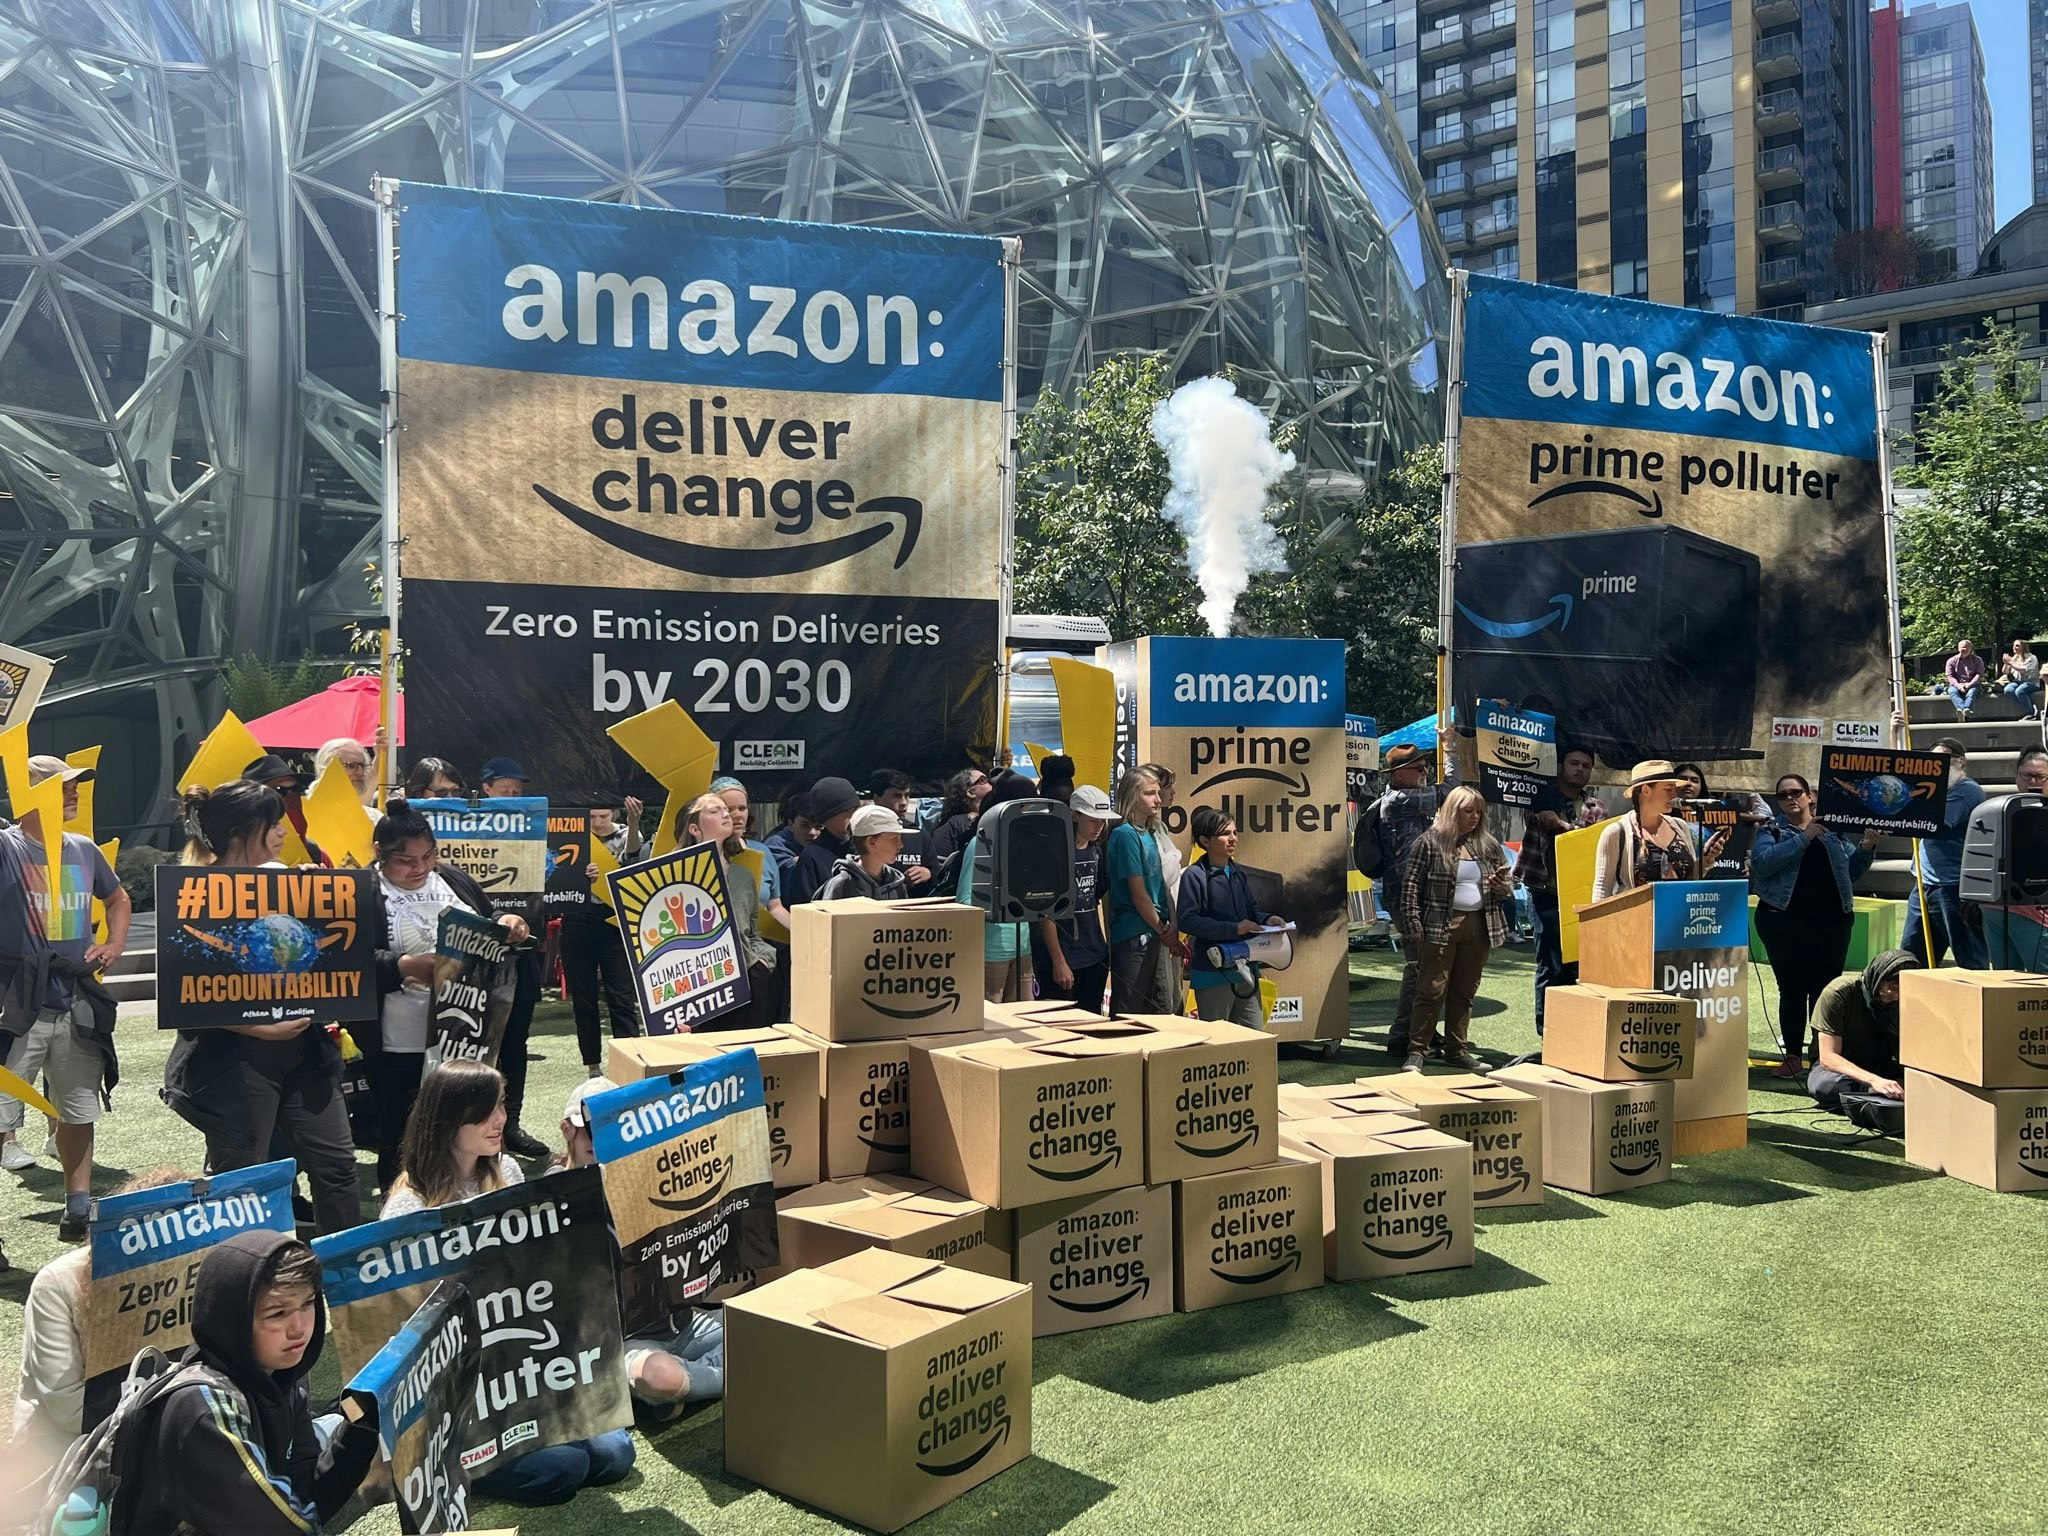 Amazon workers, Athena coalition, and allies rally at Amazon's Seattle HQ holding signs demand climate action and accountability.